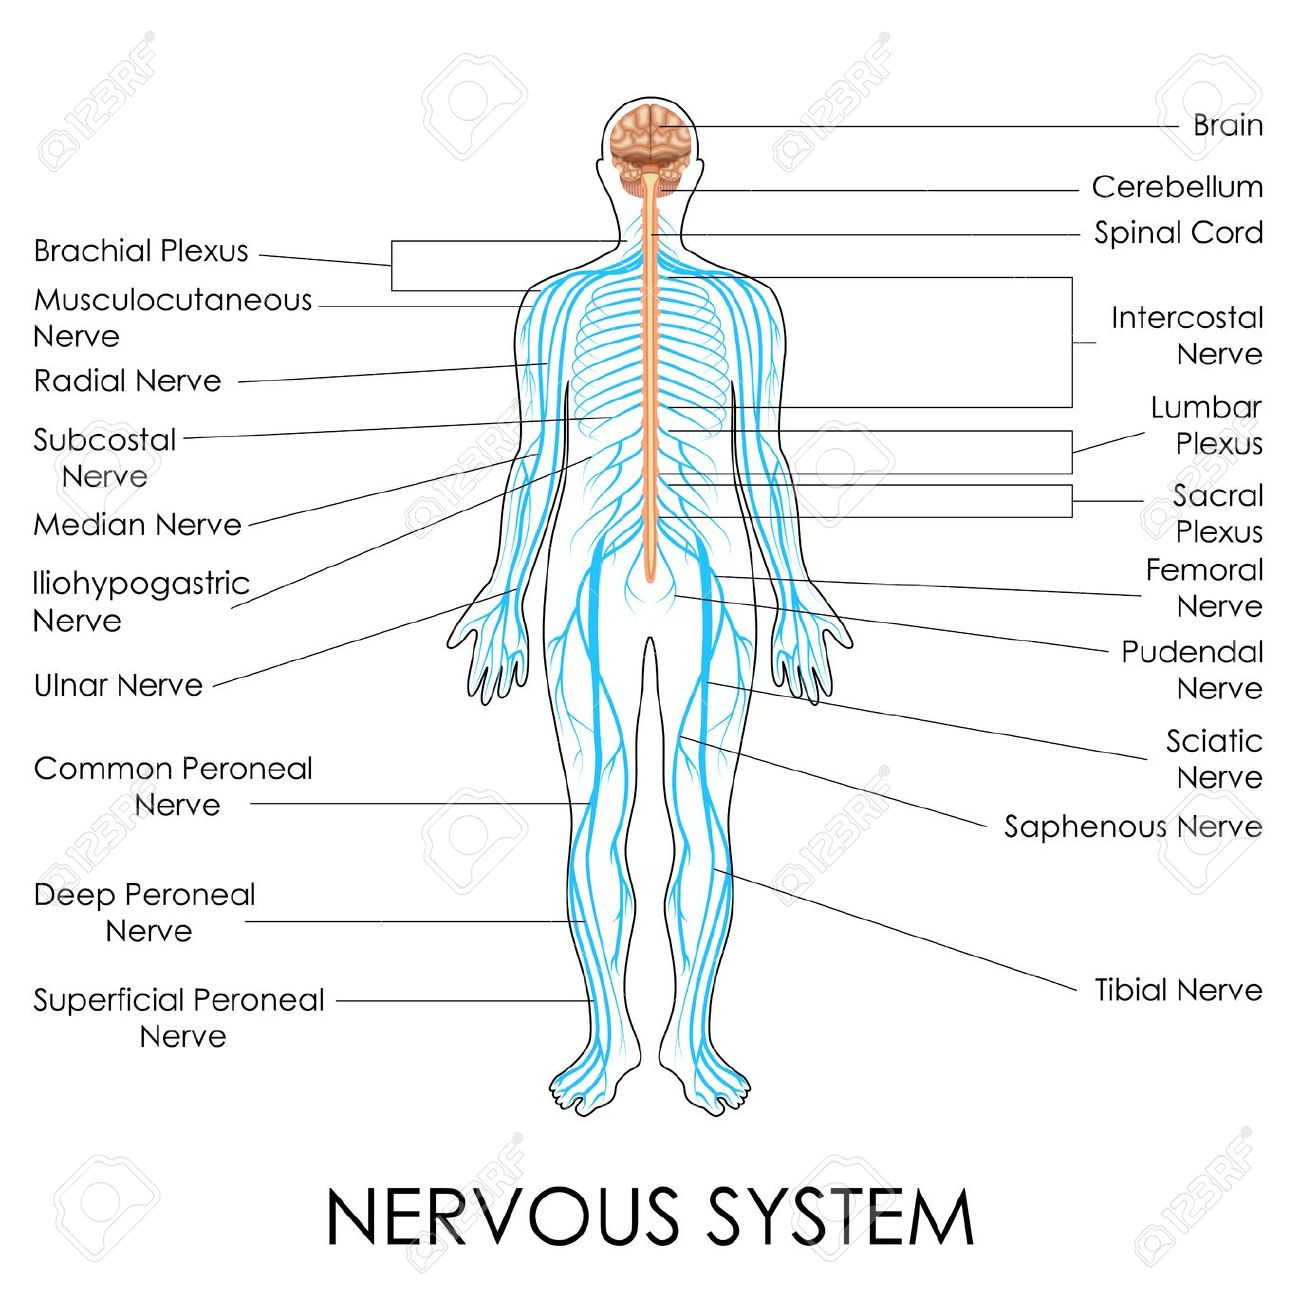 Nervous System Diagram What Two Systems Regulate And Coordinate Body Functions Socratic